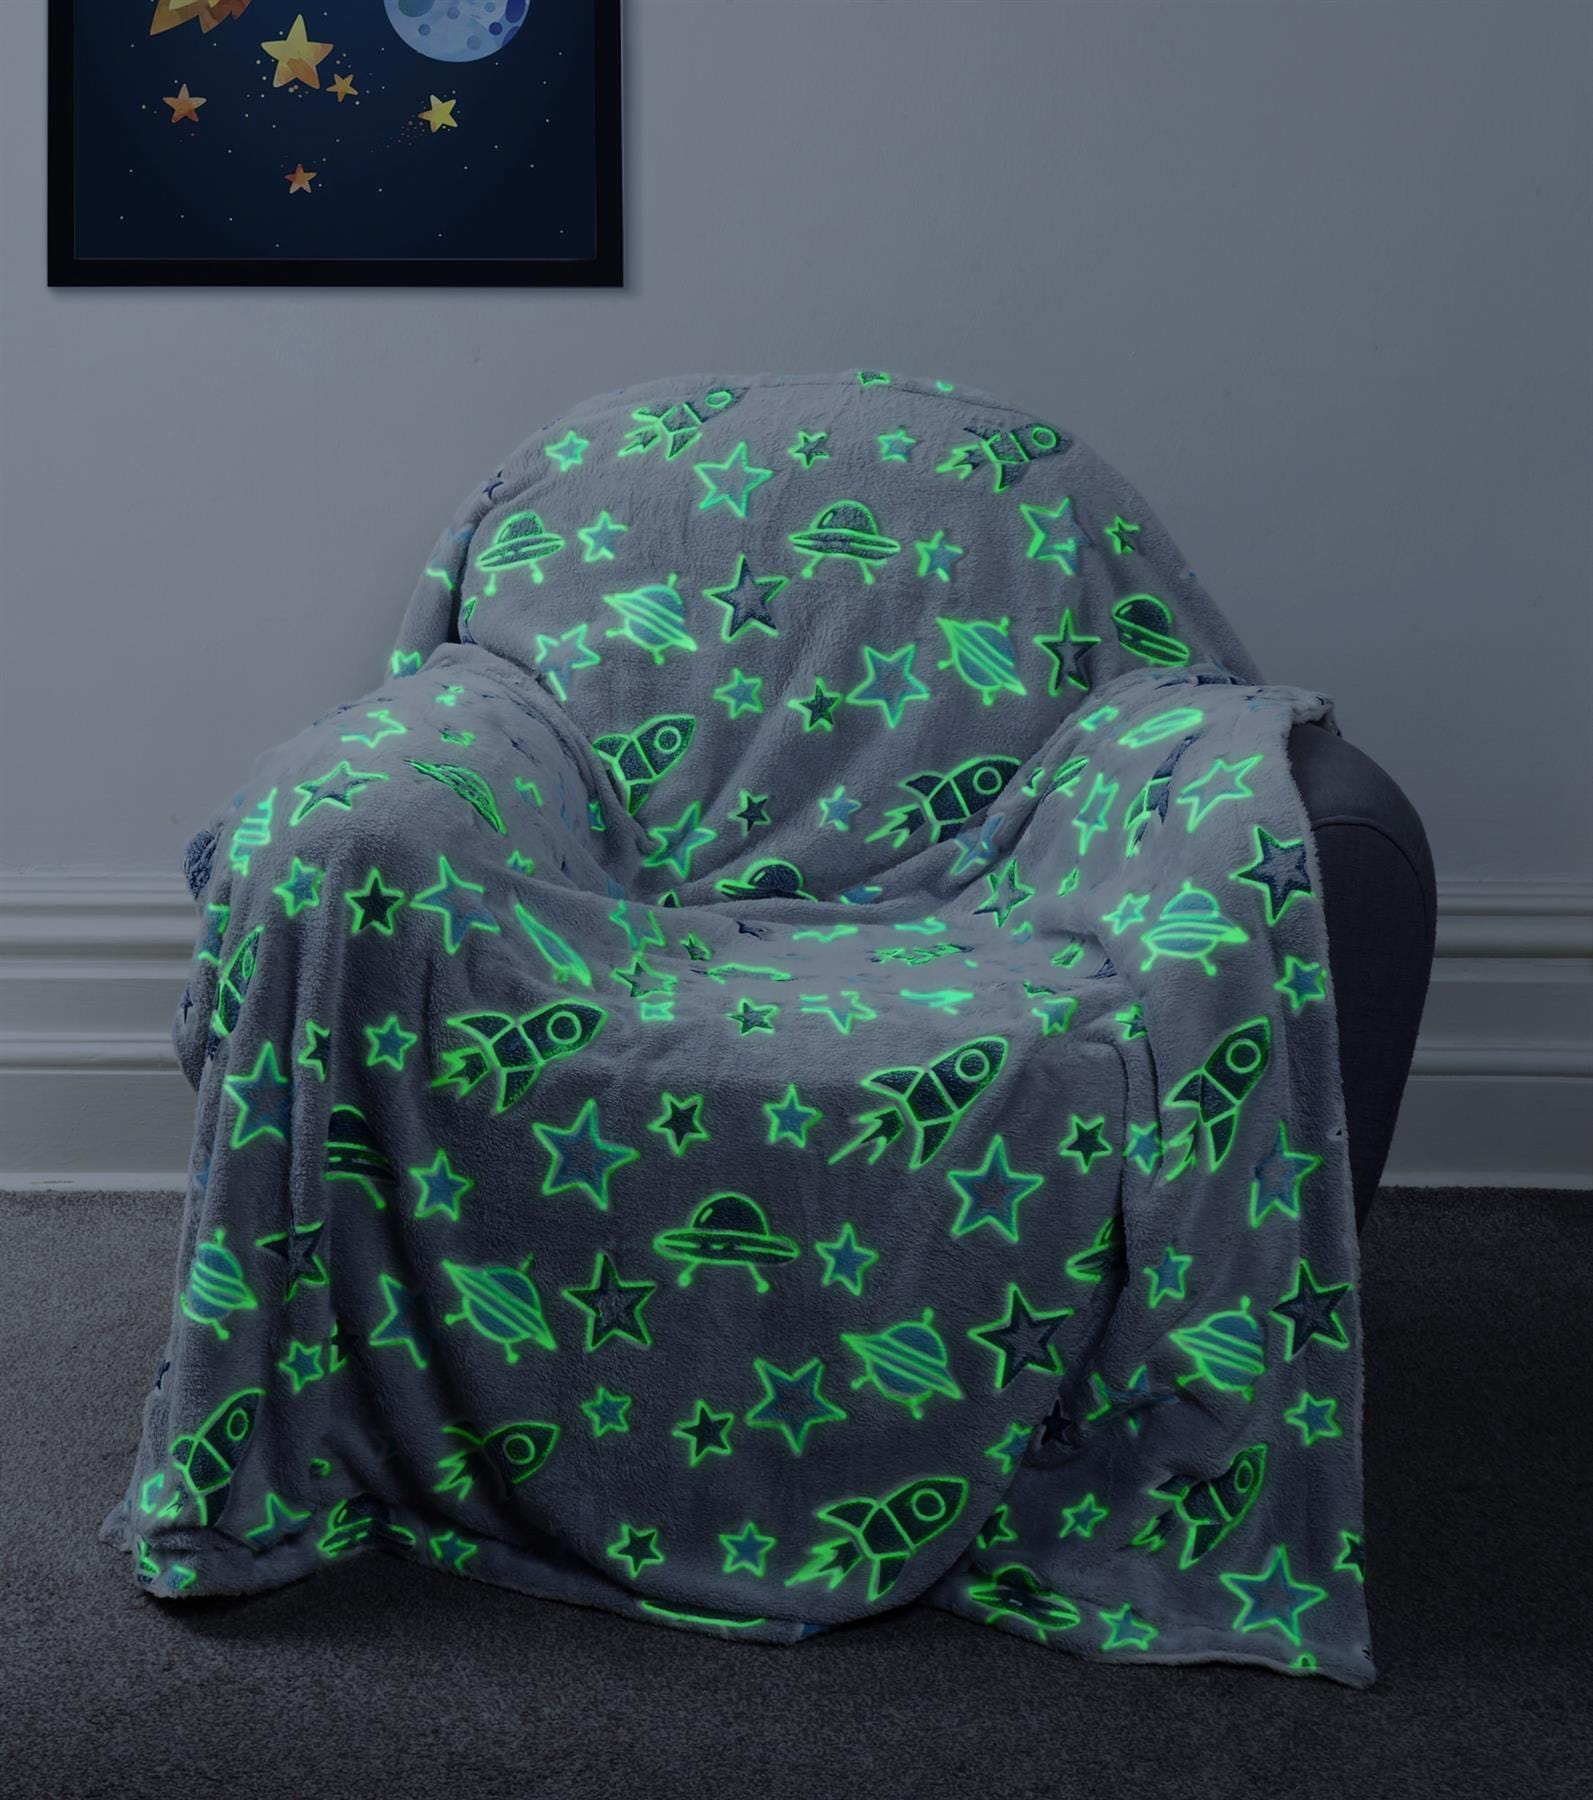 Outer Space Glow In The Dark Teddy Duvet Set OLIVIA ROCCO Duvet Cover